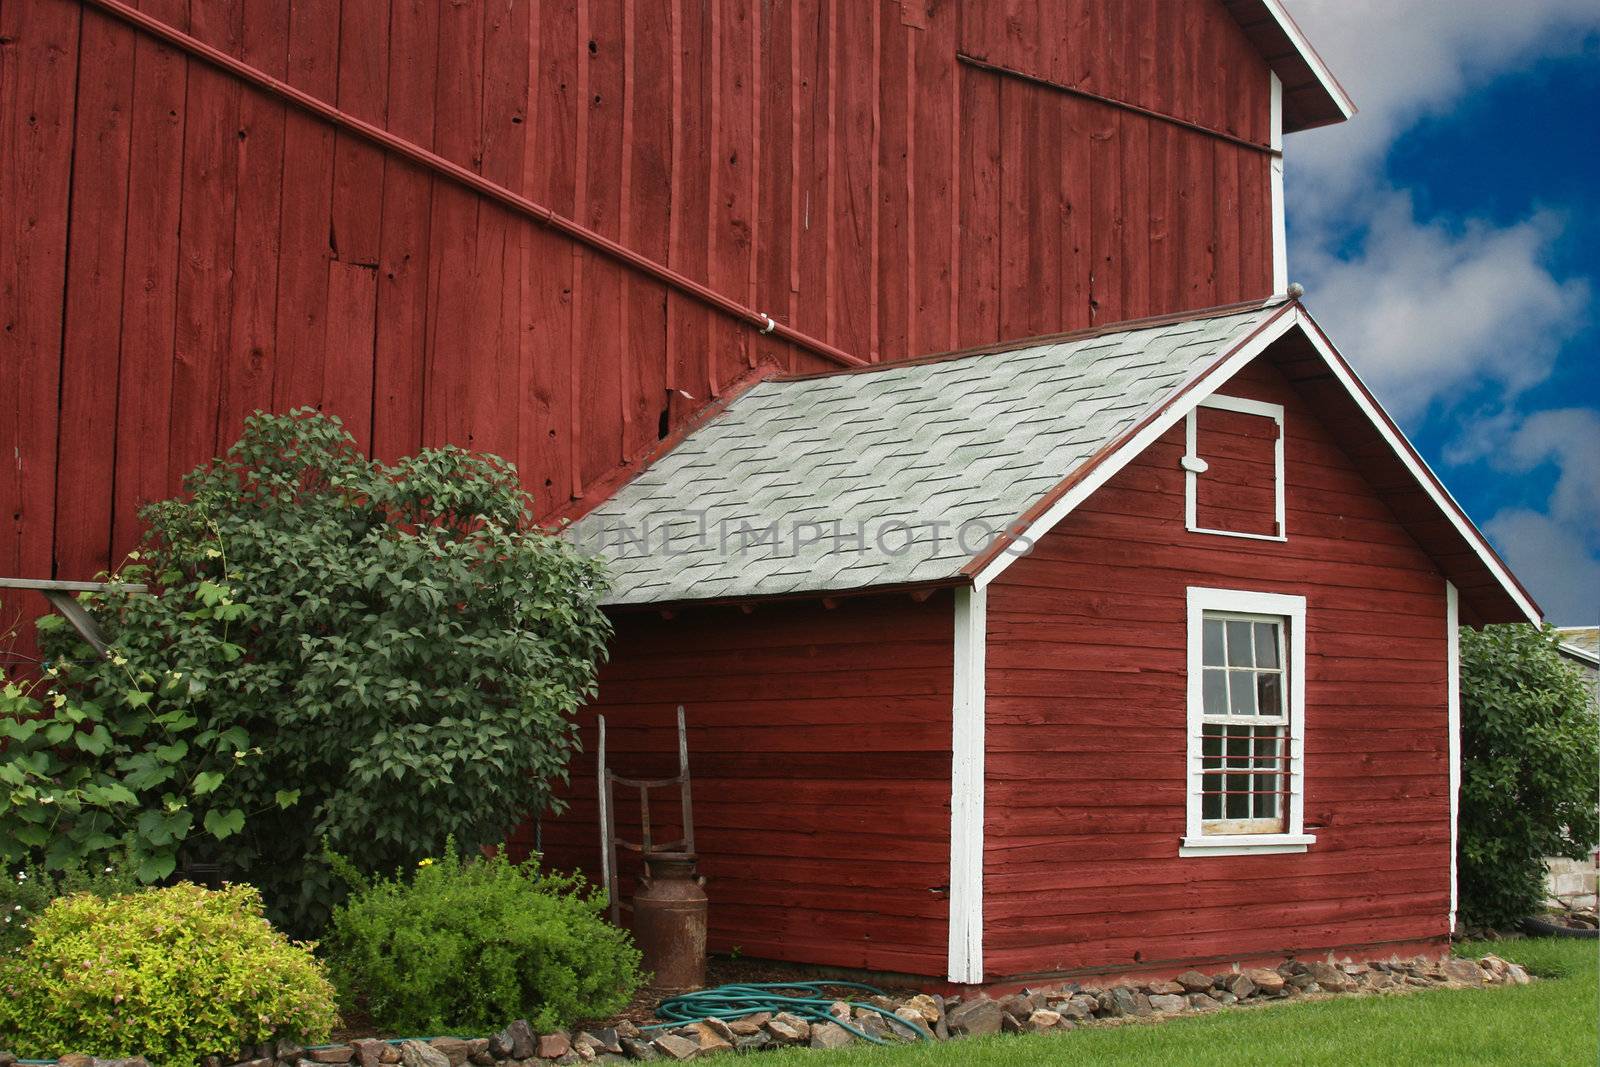 vintage red barn and milk house with rocks and bushes for landscaping